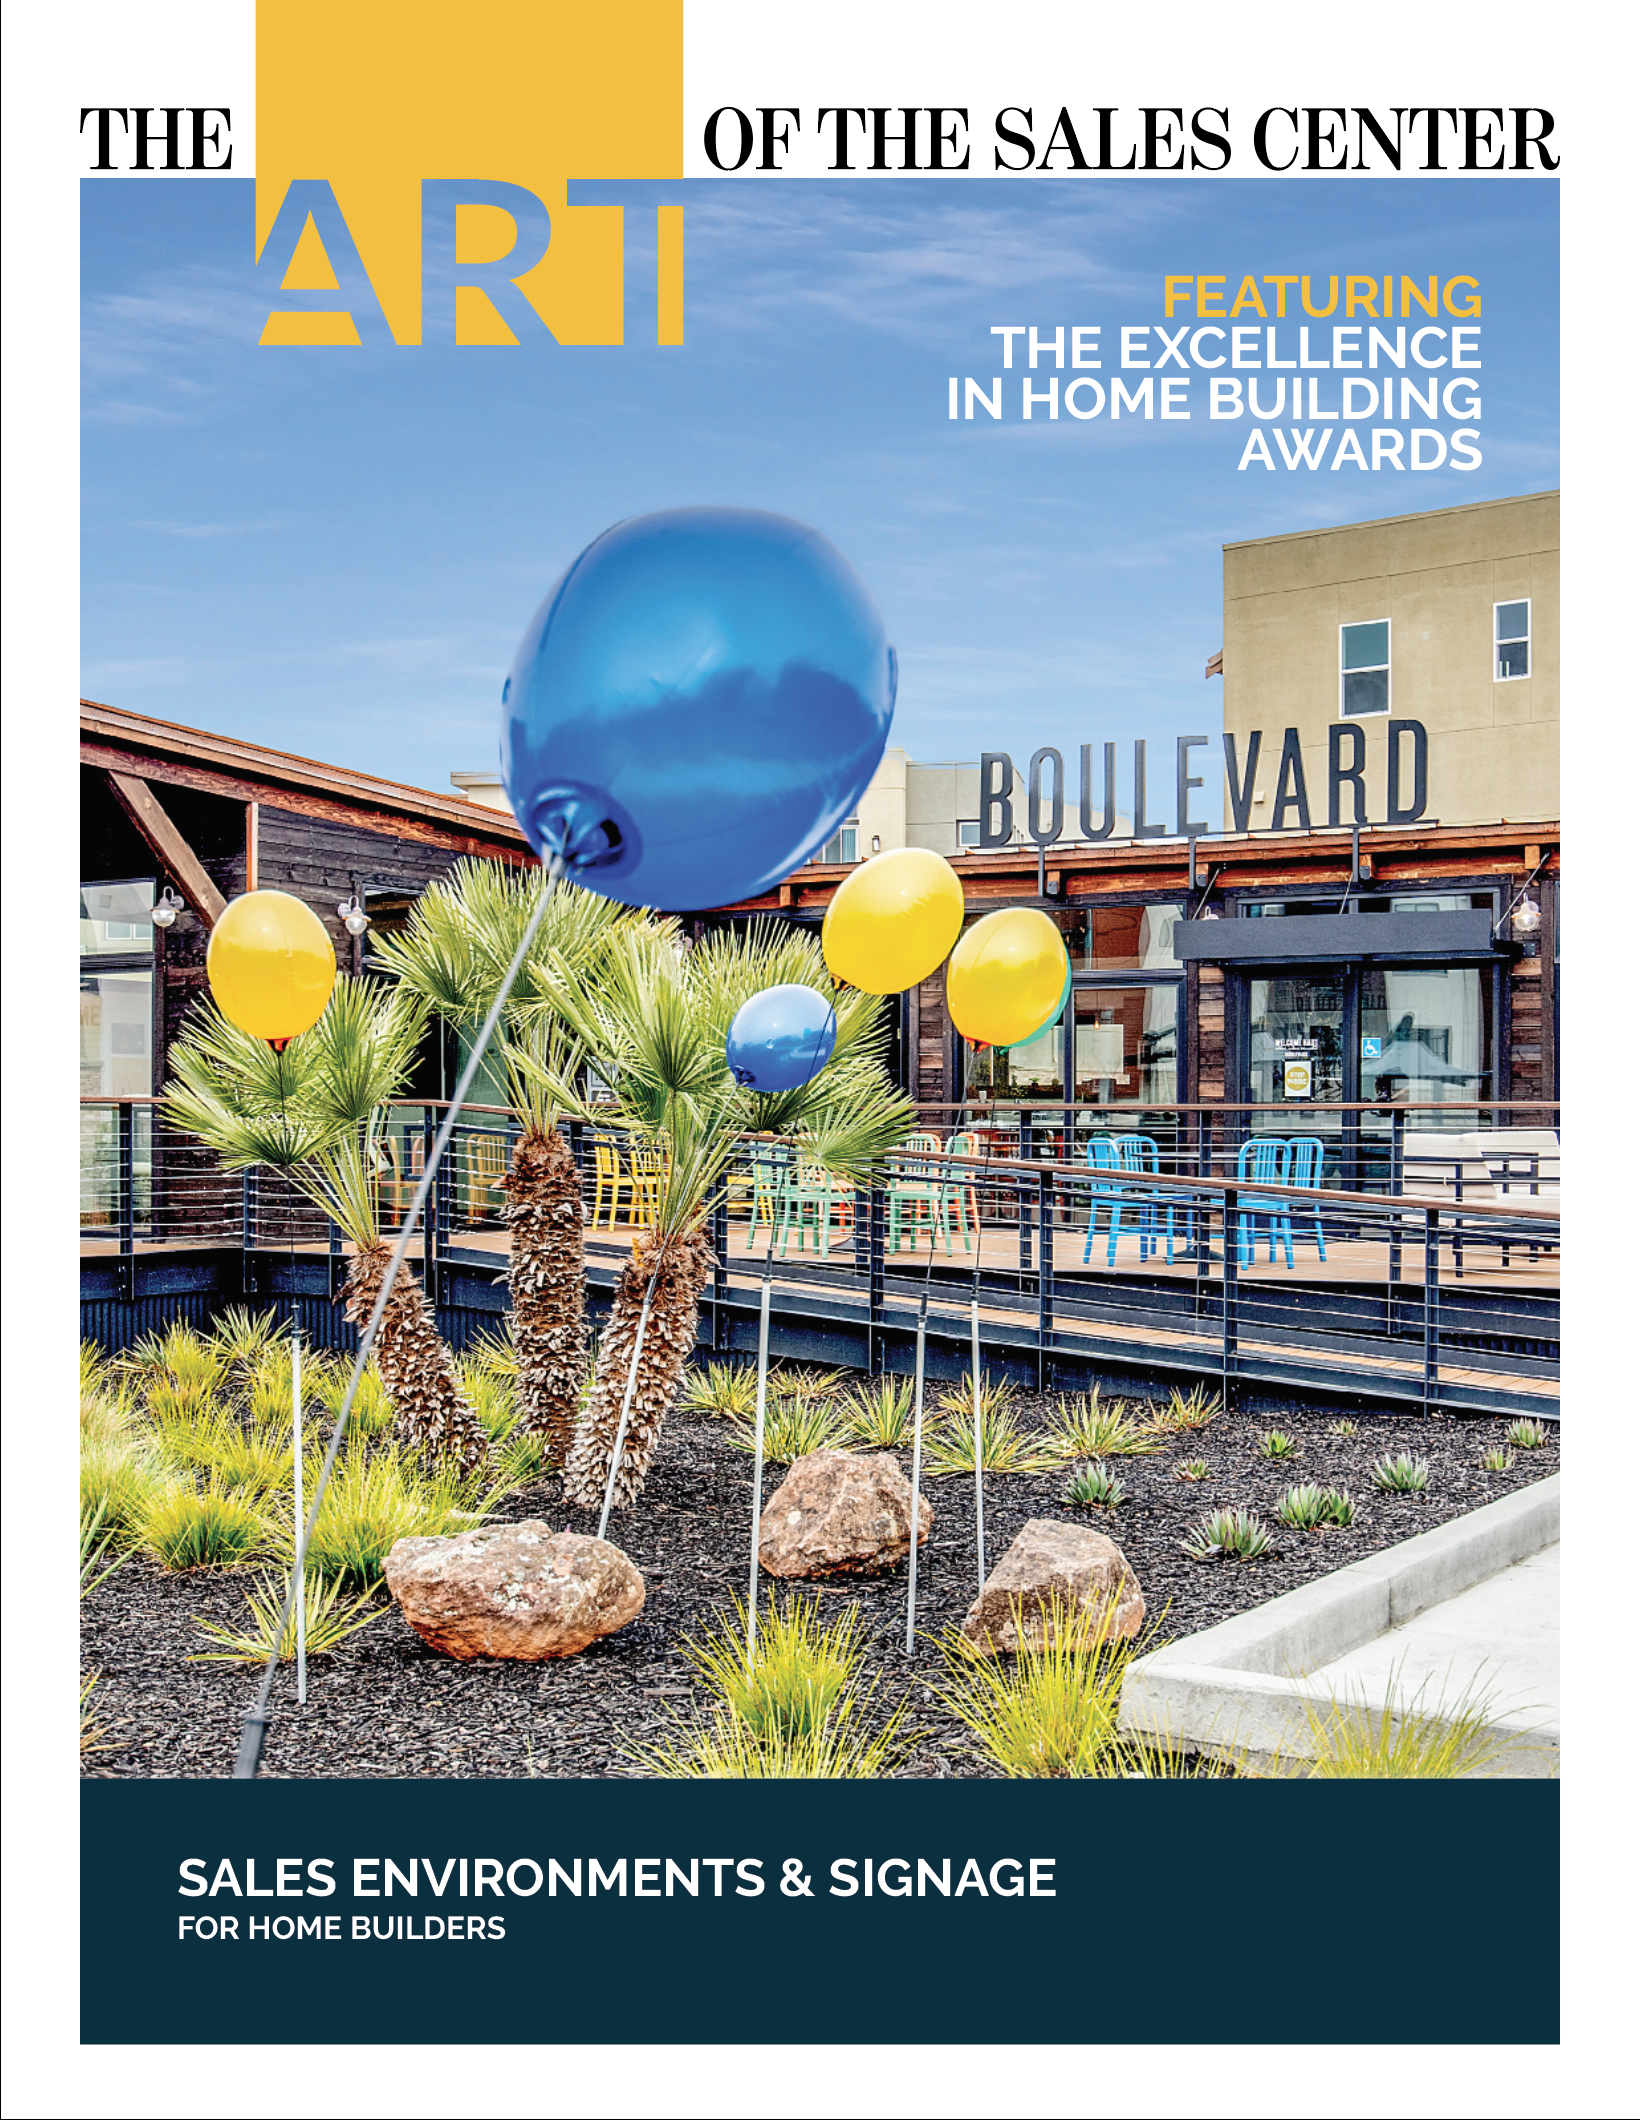 The art of the sales center magazine by Marketshare, sales environments and signage